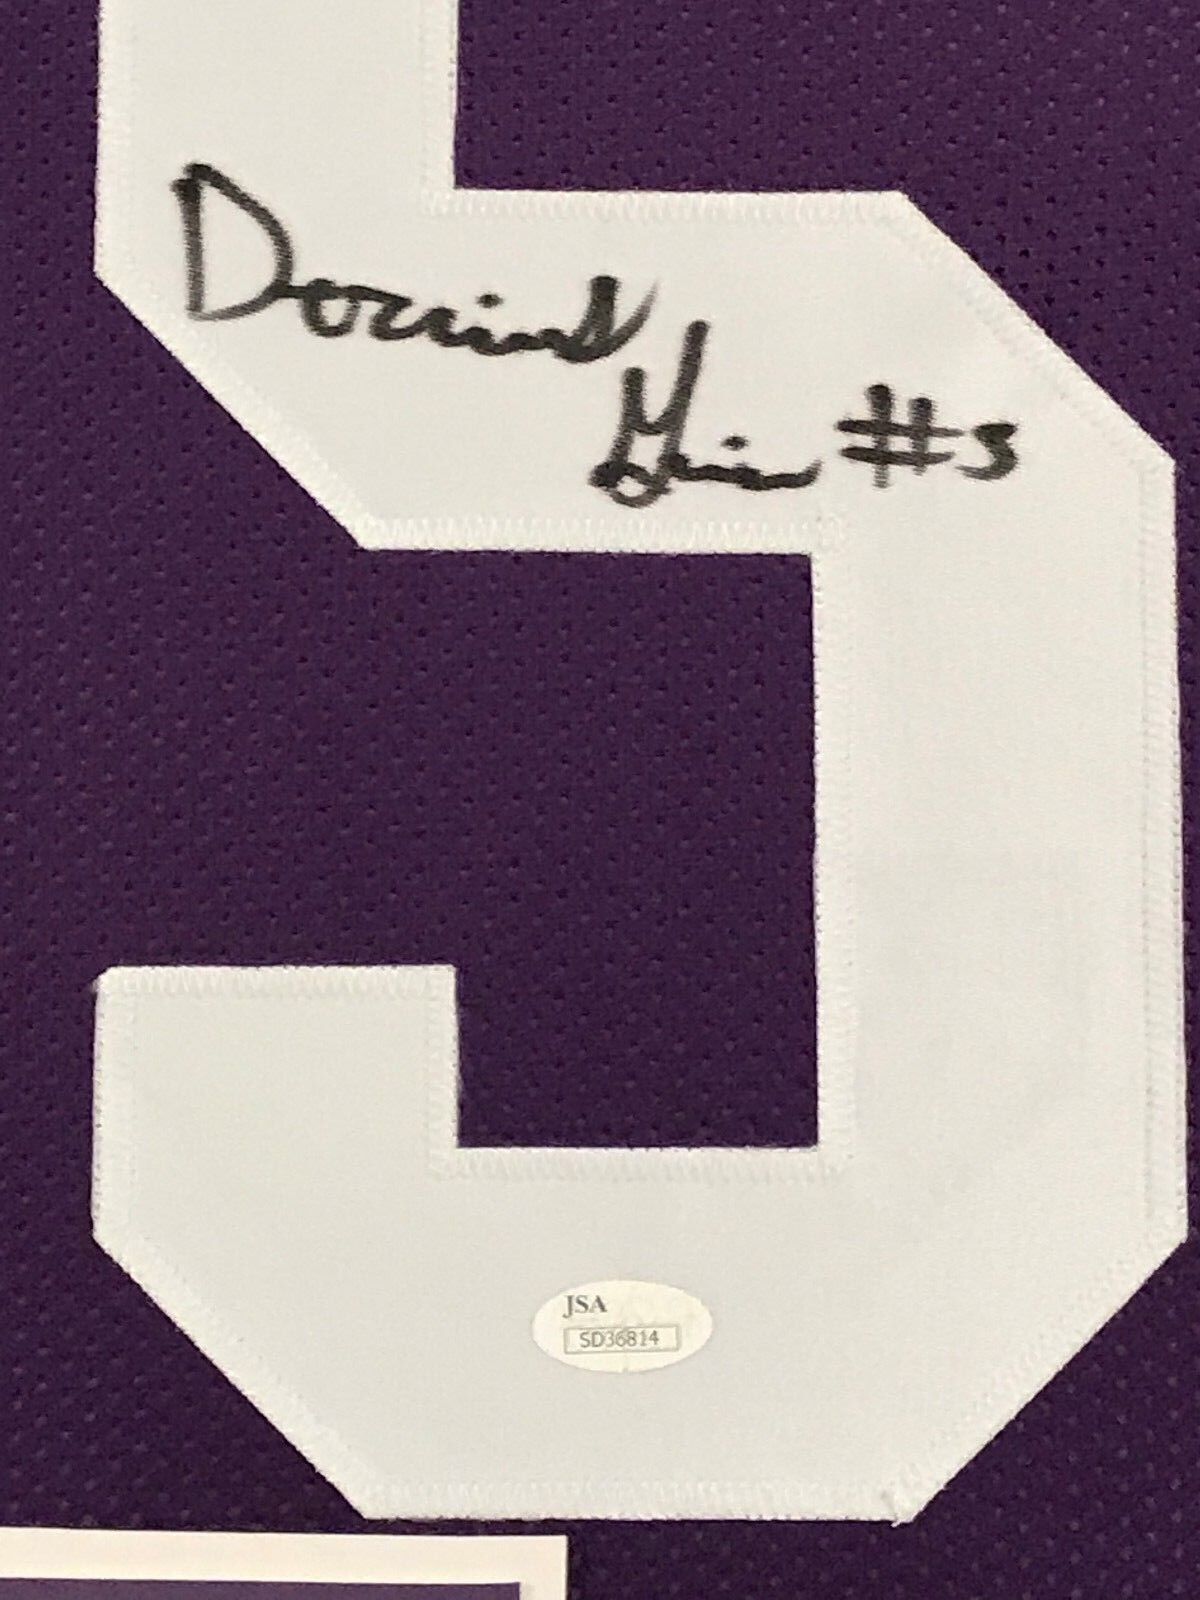 MVP Authentics Framed Derrius Guice Autographed Signed Lsu Tigers Jersey Jsa Coa 269.10 sports jersey framing , jersey framing